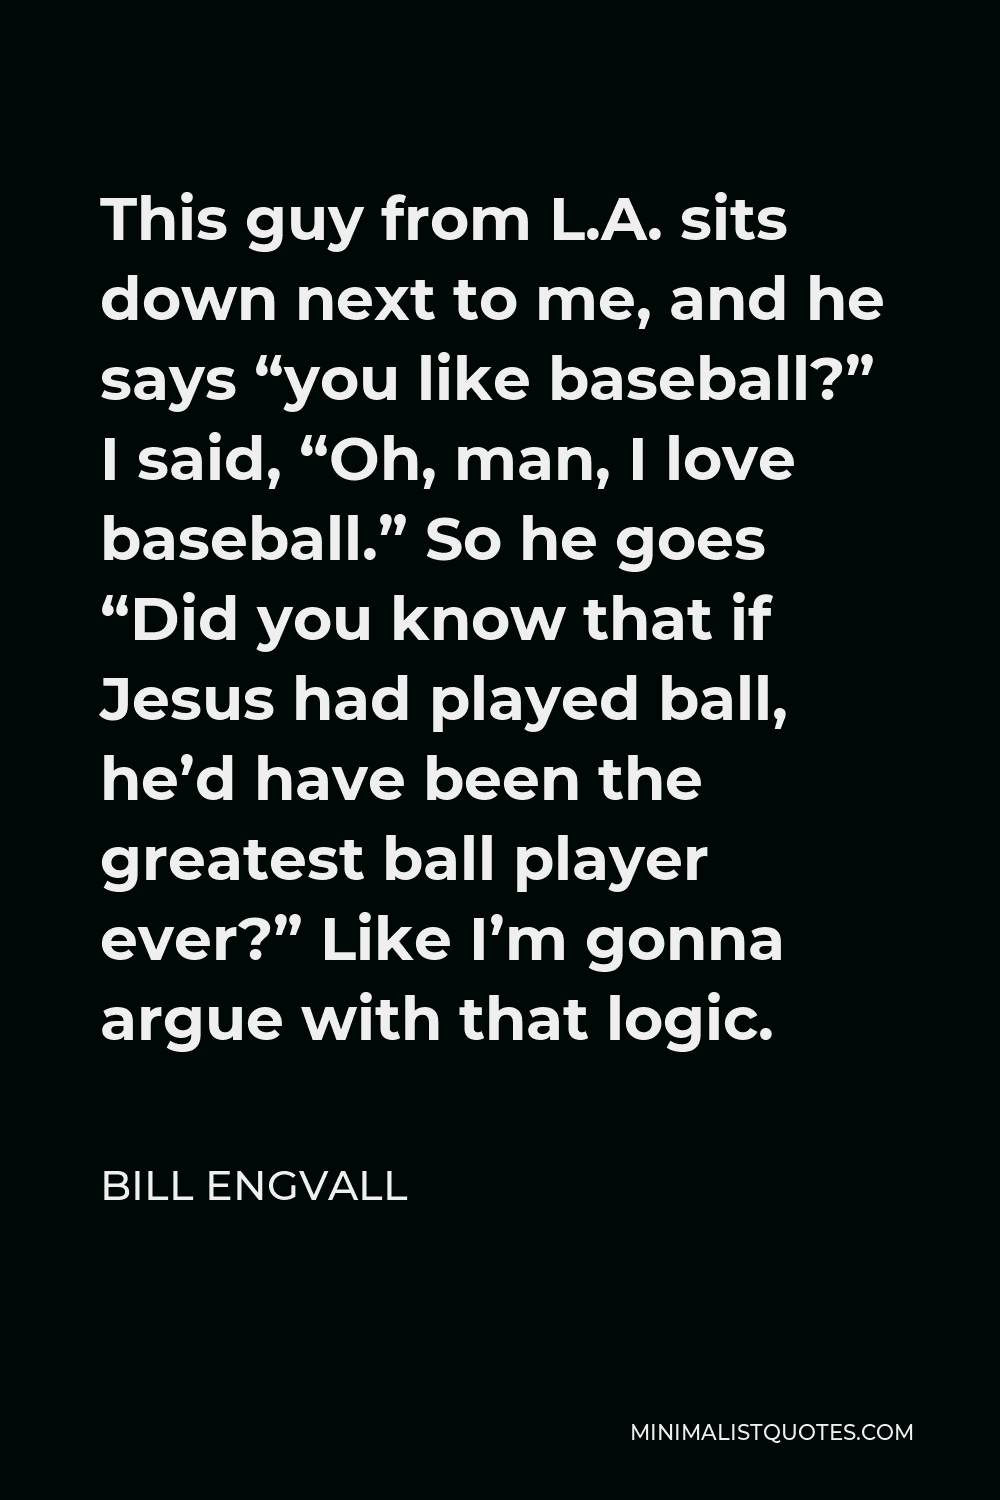 Bill Engvall Quote - This guy from L.A. sits down next to me, and he says “you like baseball?” I said, “Oh, man, I love baseball.” So he goes “Did you know that if Jesus had played ball, he’d have been the greatest ball player ever?” Like I’m gonna argue with that logic.